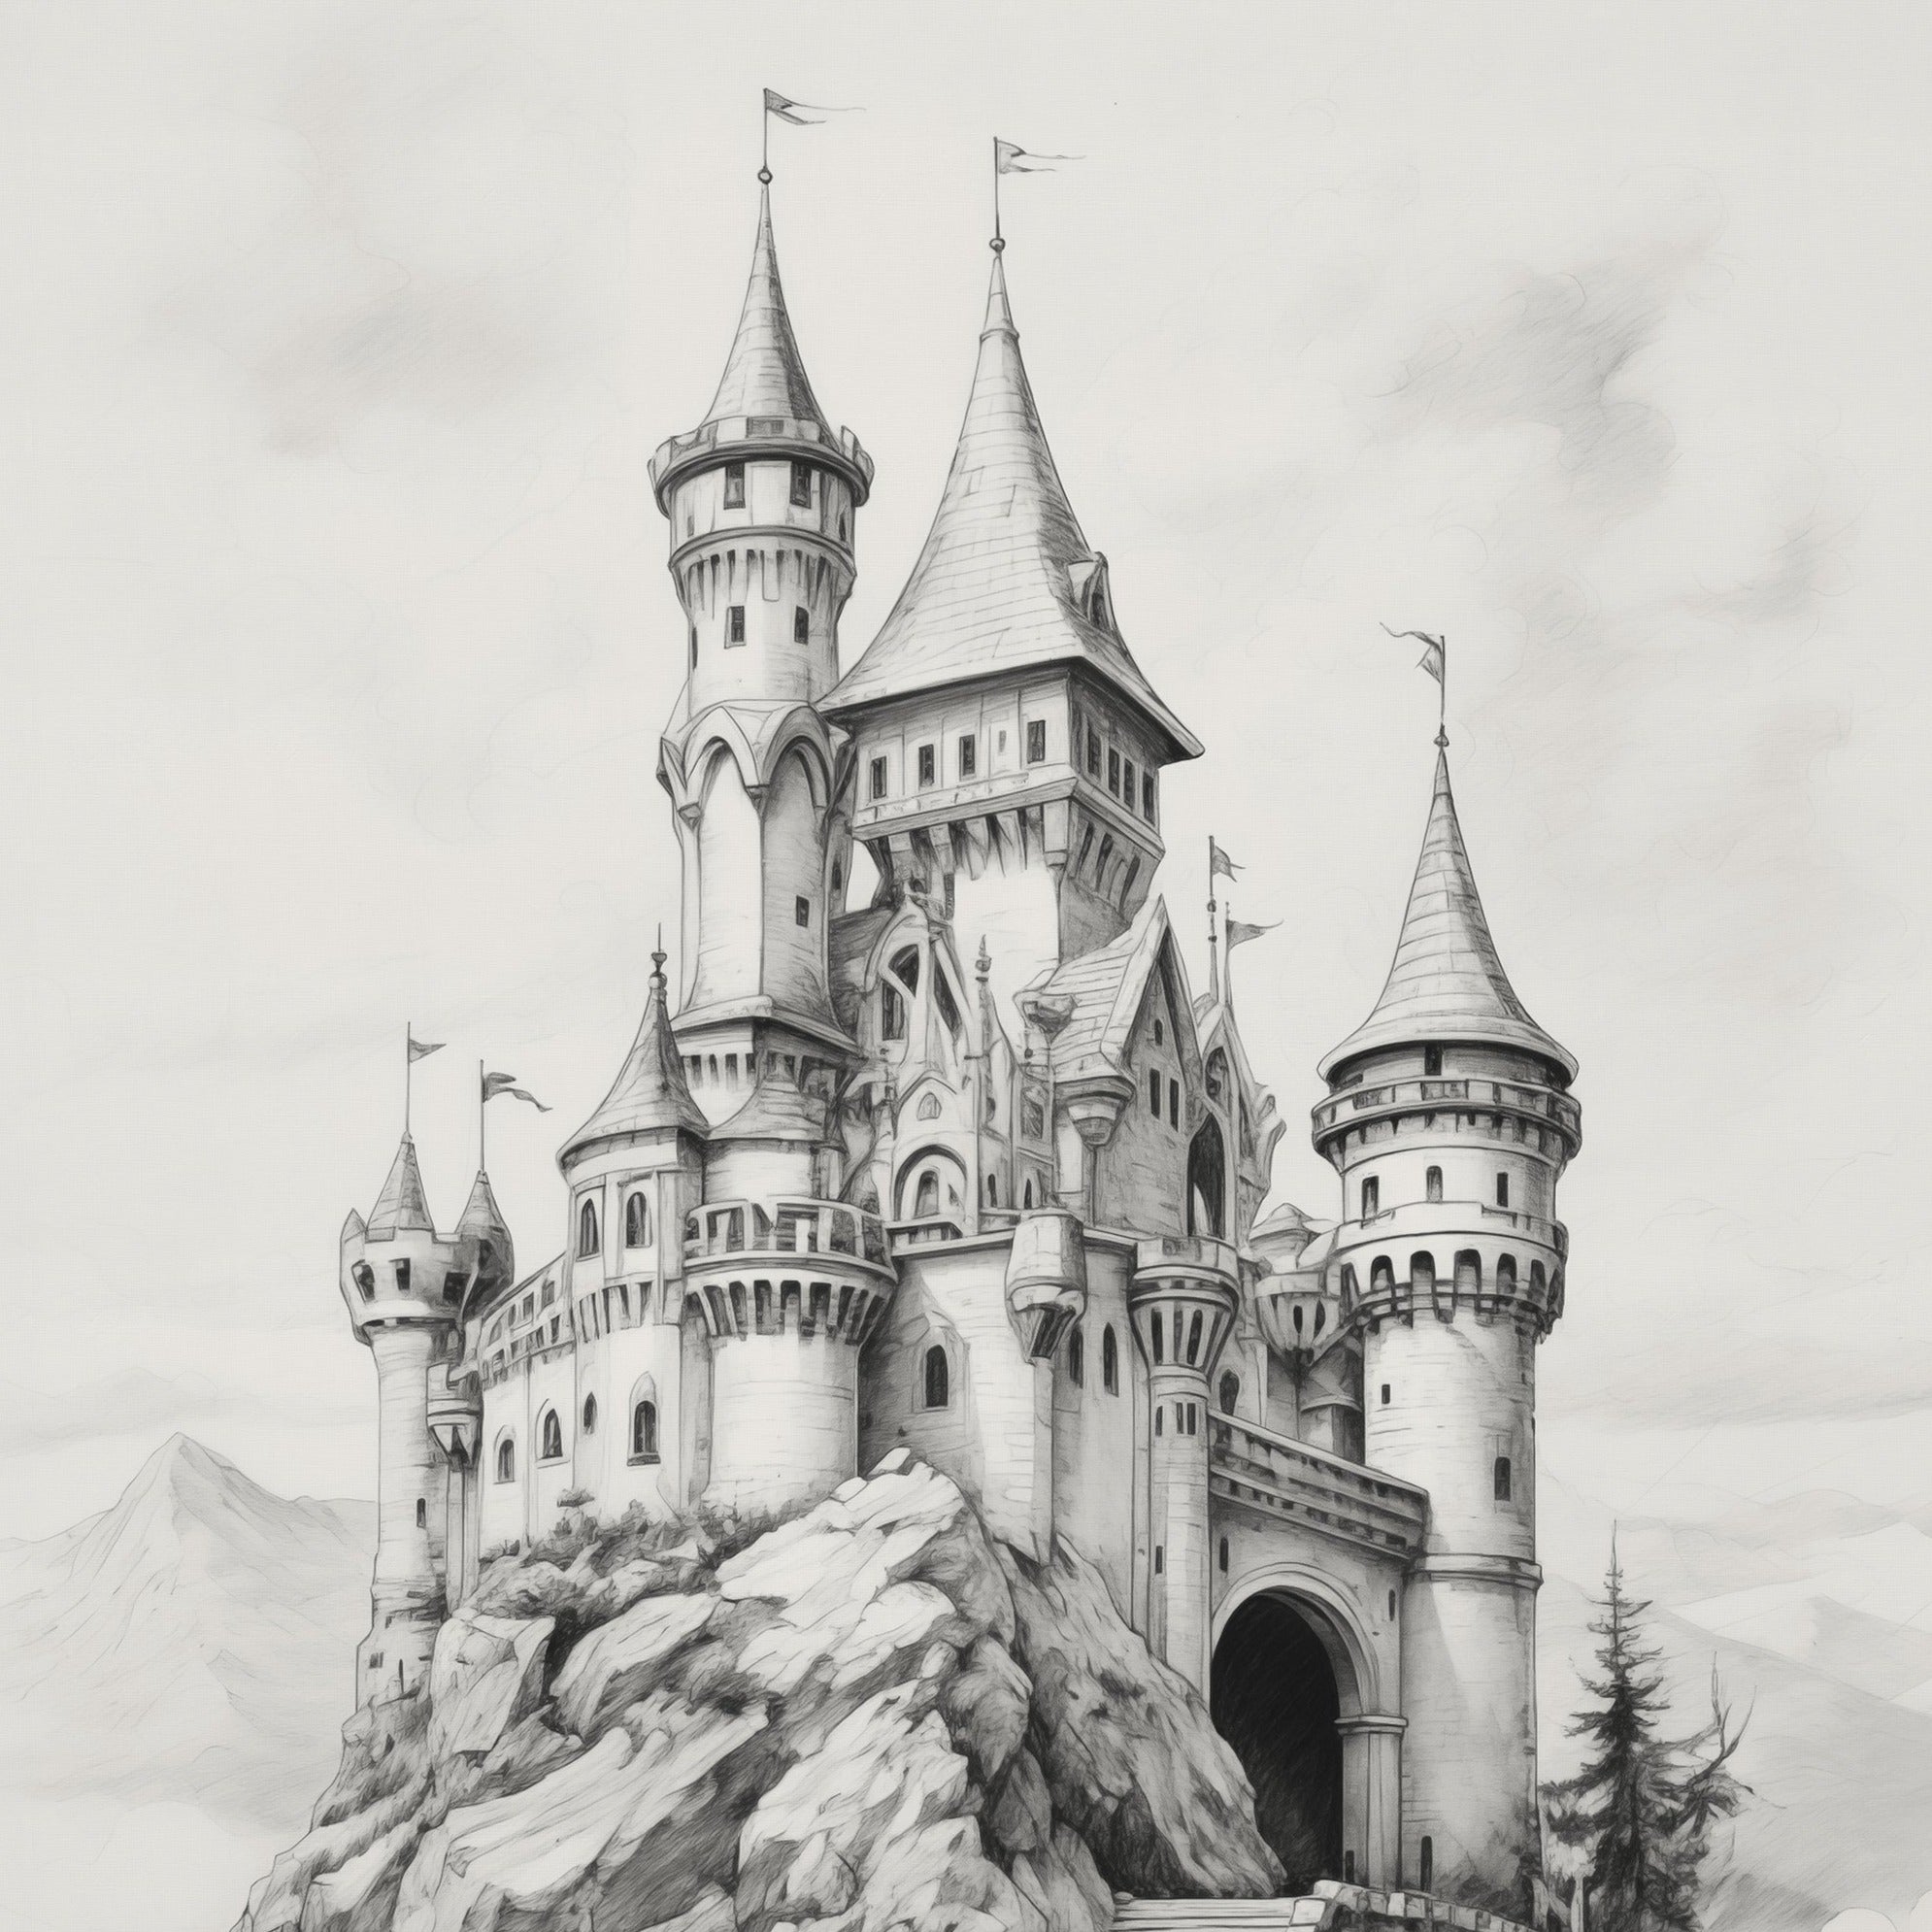 Pencil-drawn Cloud Castle wallpaper mural featuring a majestic castle on a rocky mountain surrounded by misty clouds